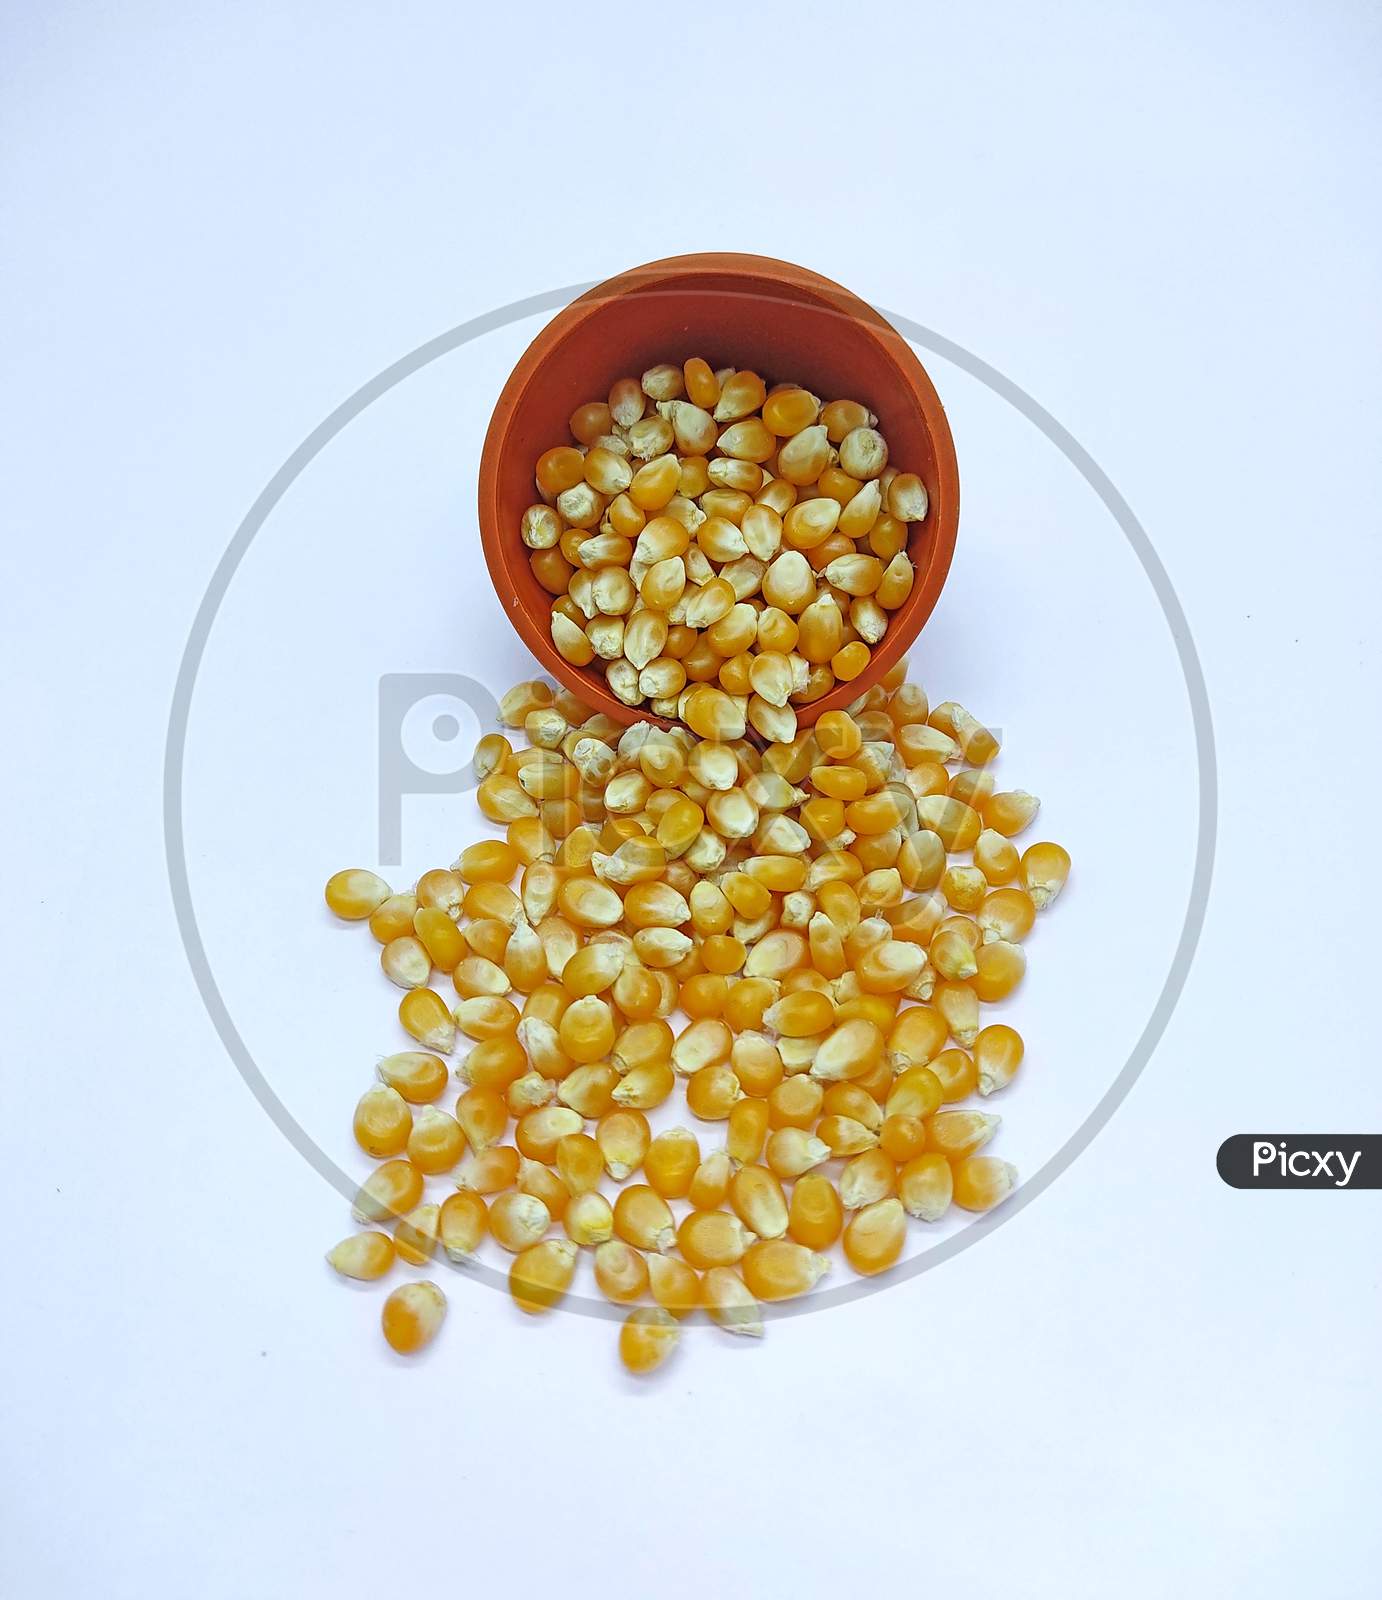 Corn Kernels, Corns Seeds, Yellow Dry Corn Grains Isolated On White Background, Falling Pouring From A Bowl